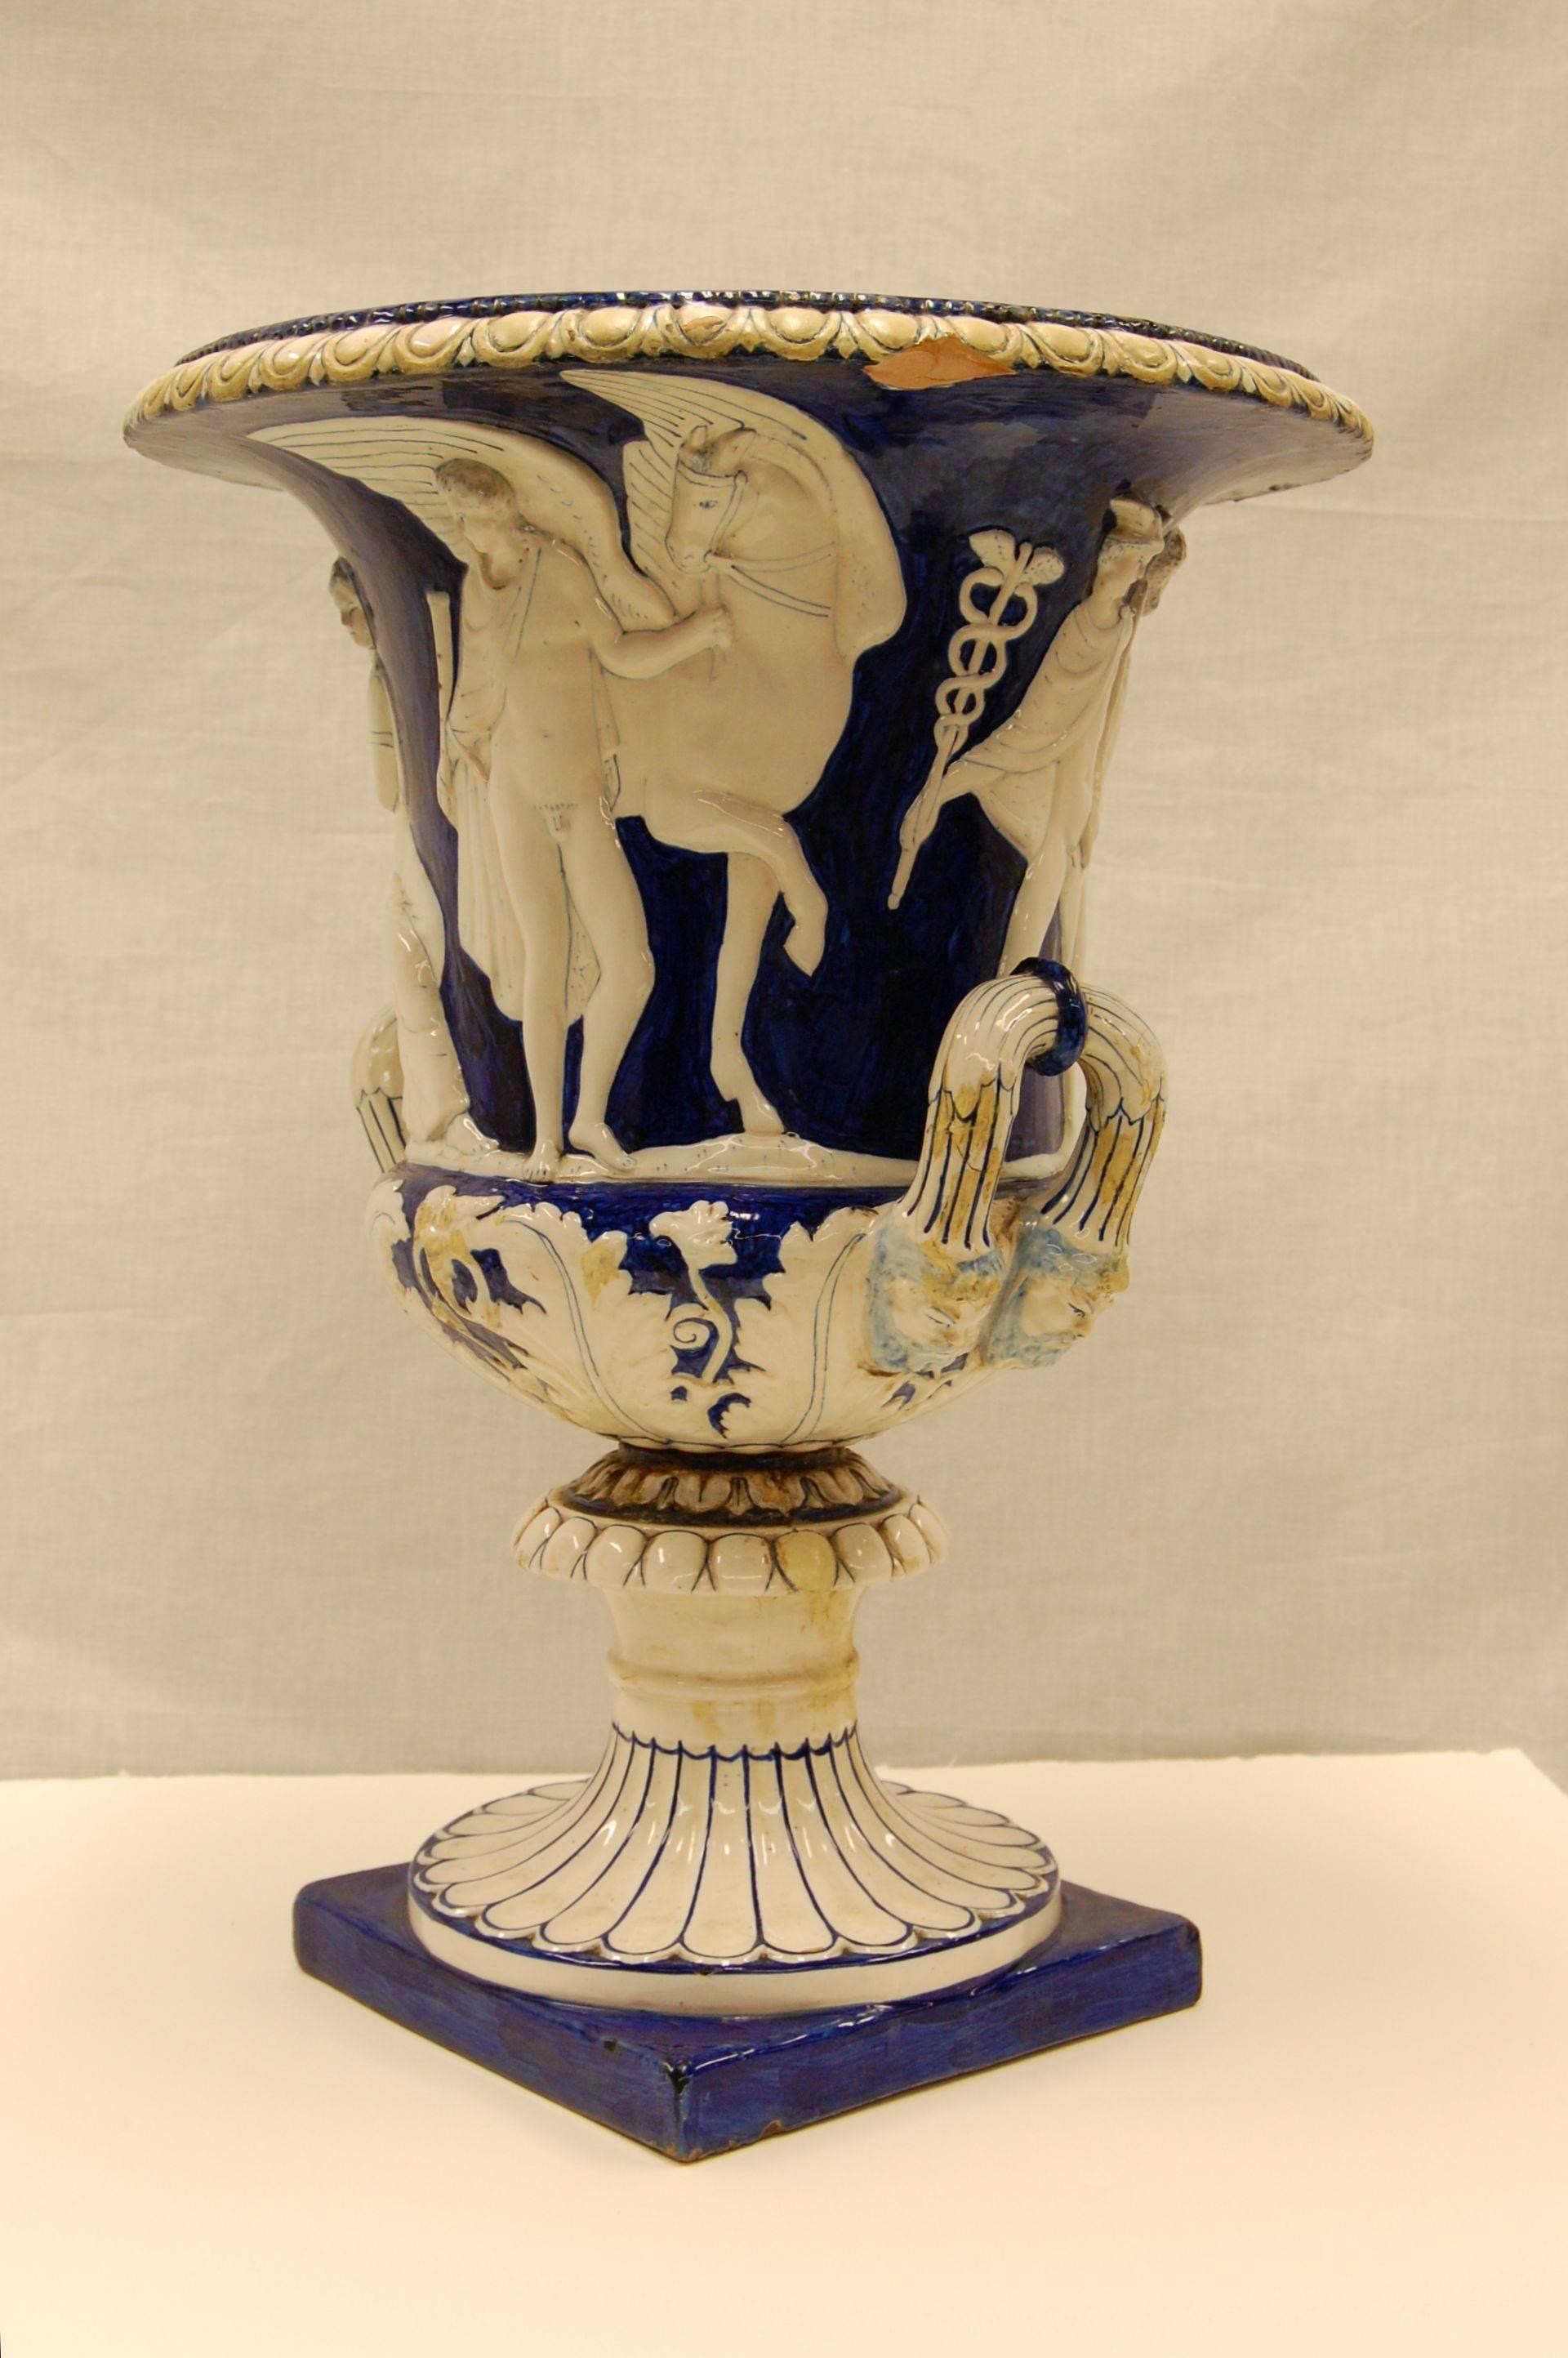 Classical Roman Antique Classically Inspired Majolica Urn in Blue and White Glazed Finish For Sale